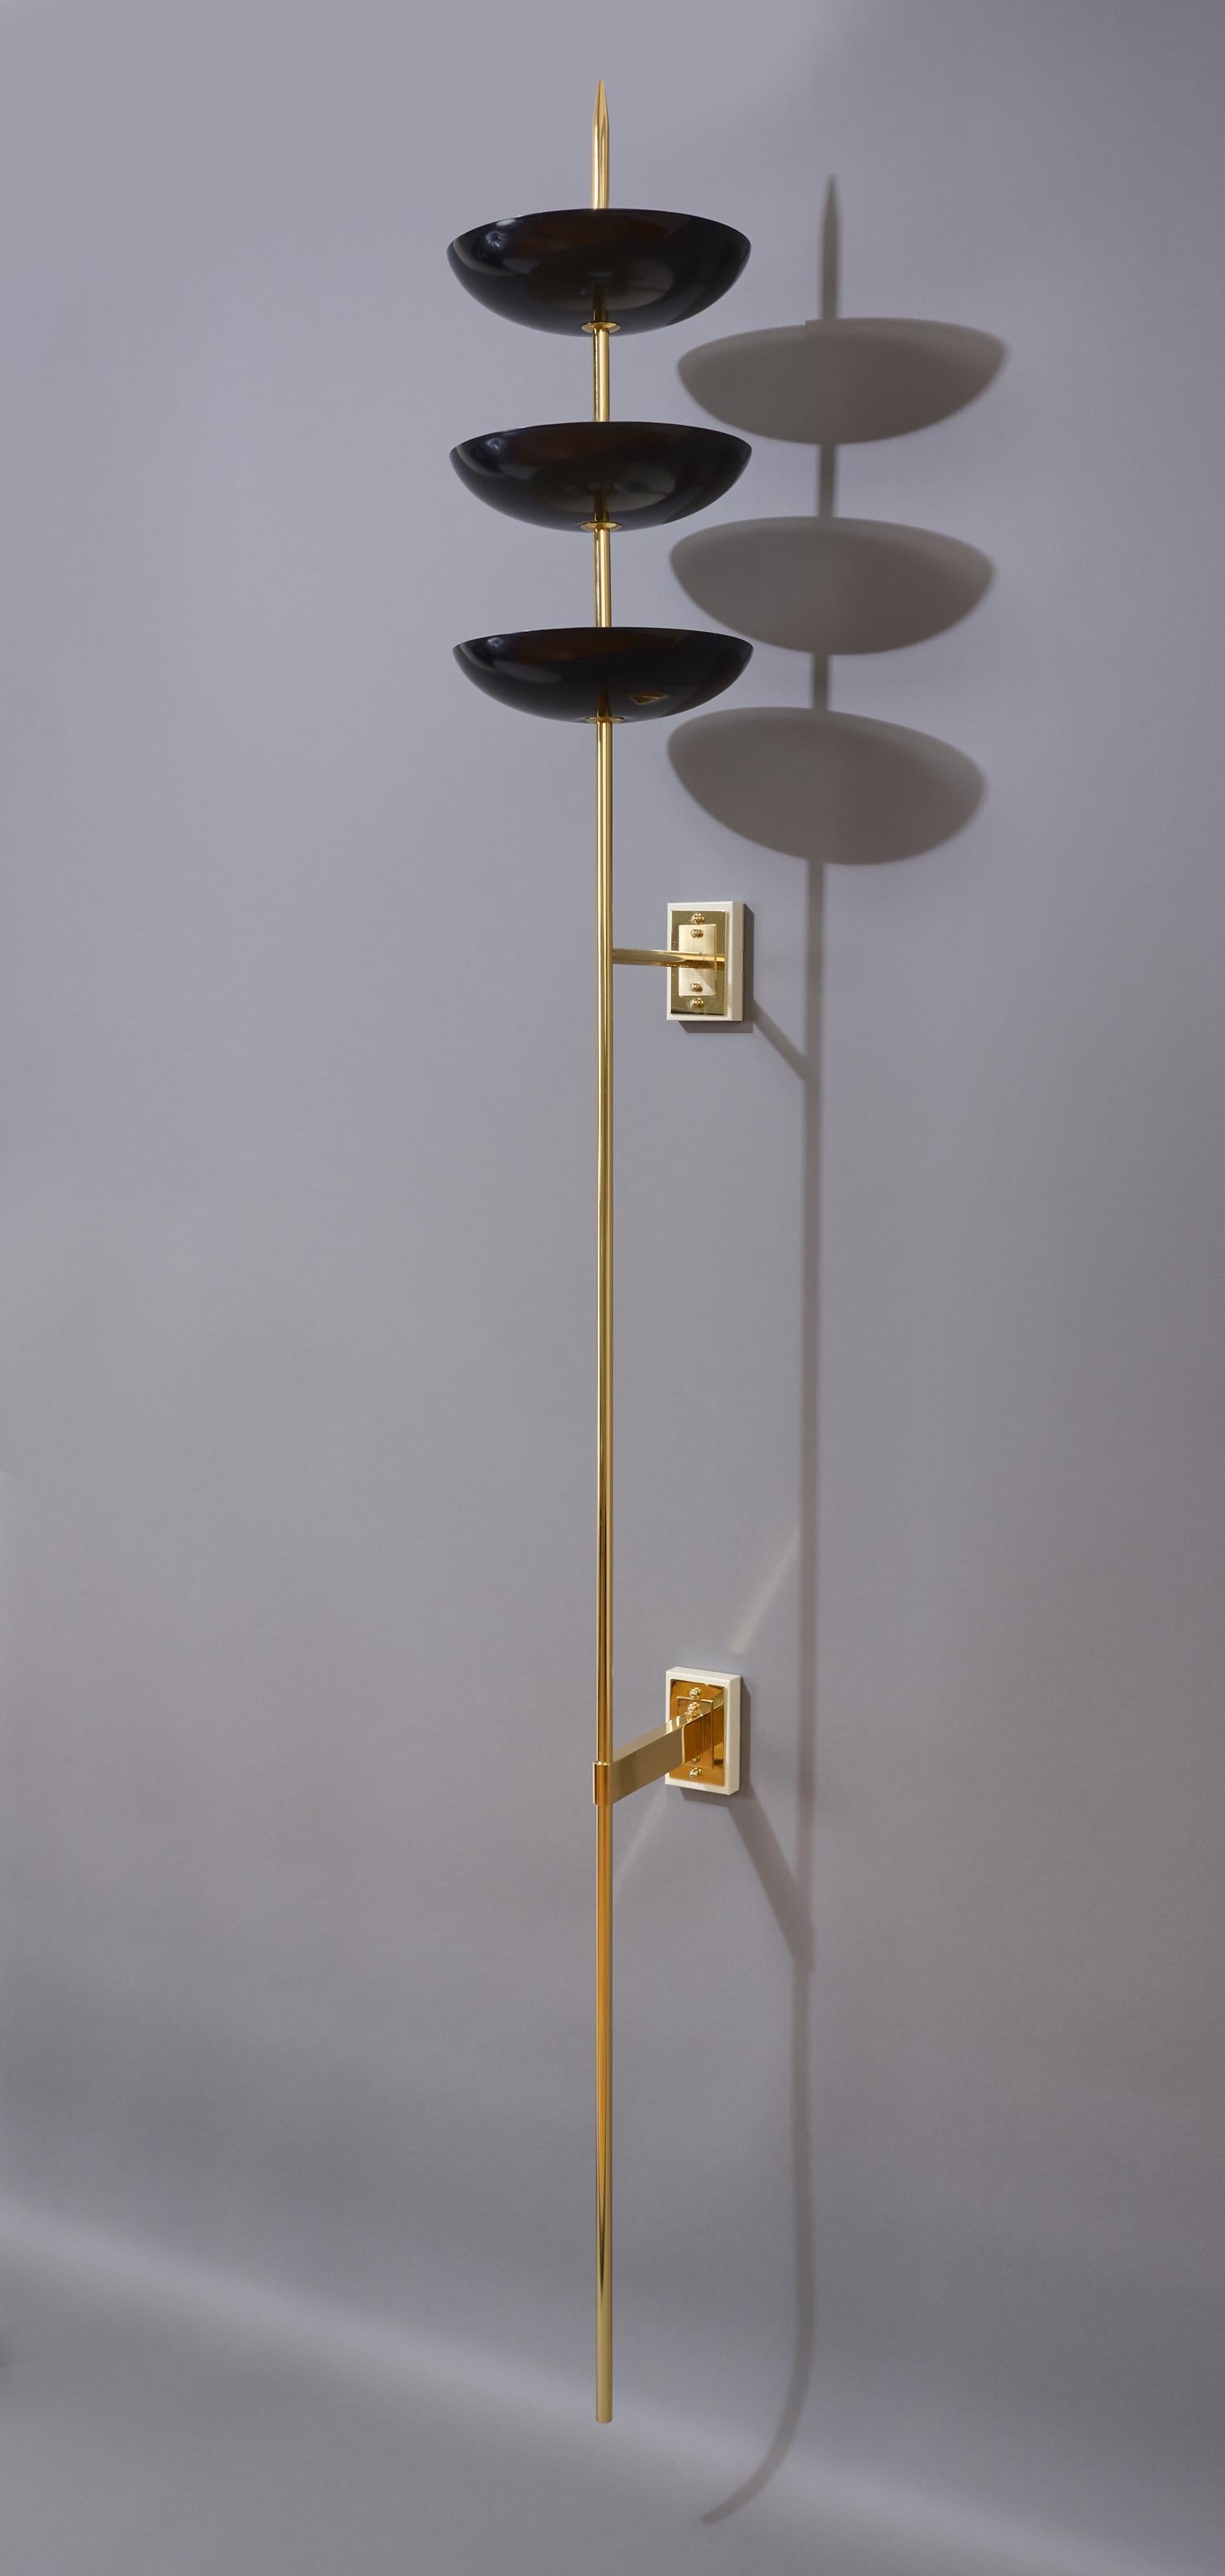 Stilnovo, Massive Pair of Three Bowl Sconces in Brass and Enamel, Italy, 1950s For Sale 1